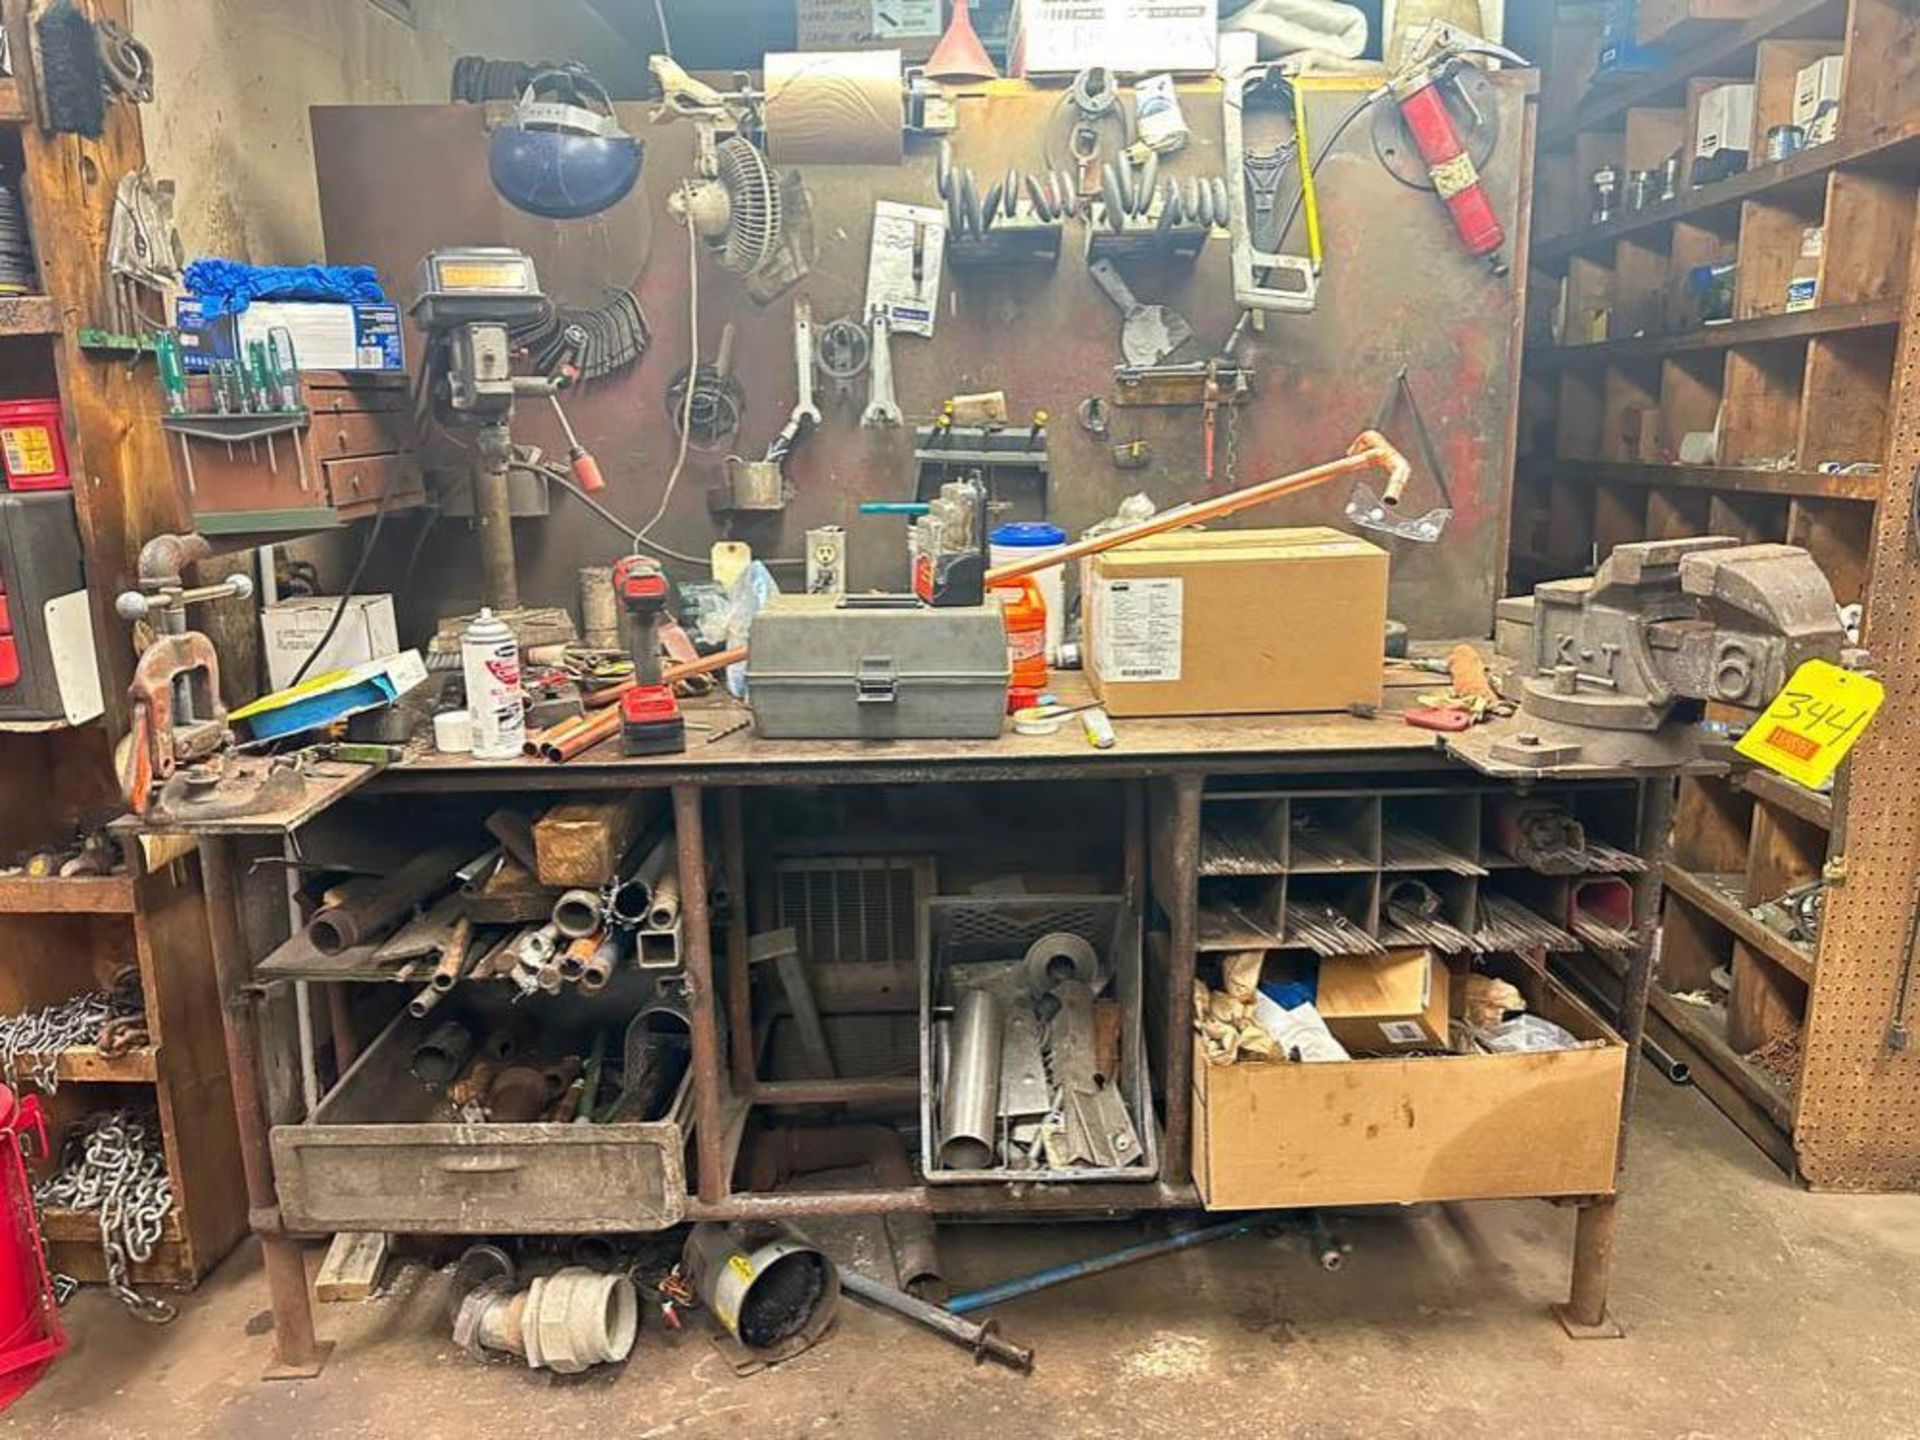 Craftsman Bench Drill Press, Bench Vise: 6”, Pipe Vise and Tools - Rigging Fee: $300